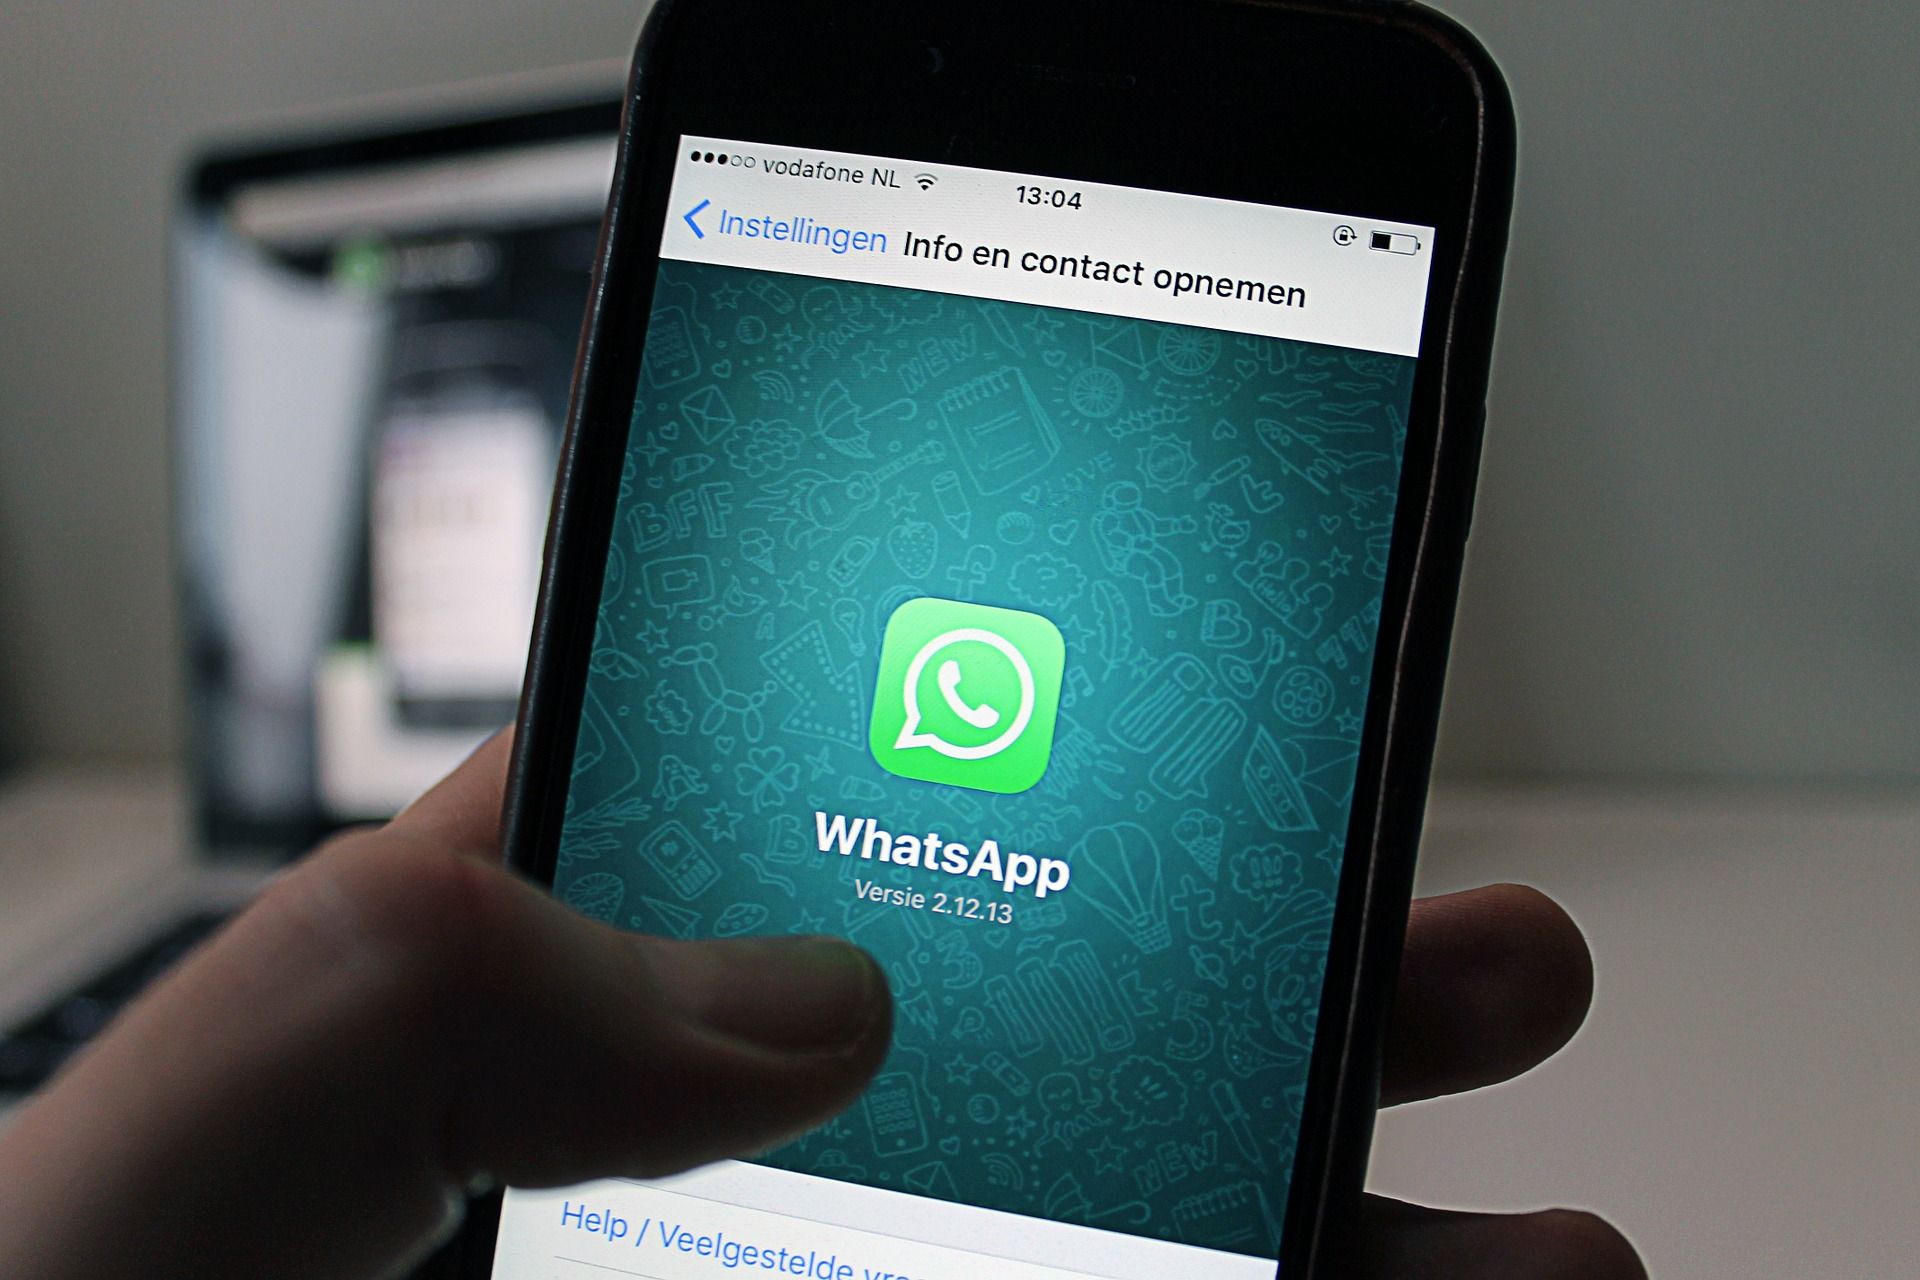 Always mute, catalogue shortcut among upcoming WhatsApp features